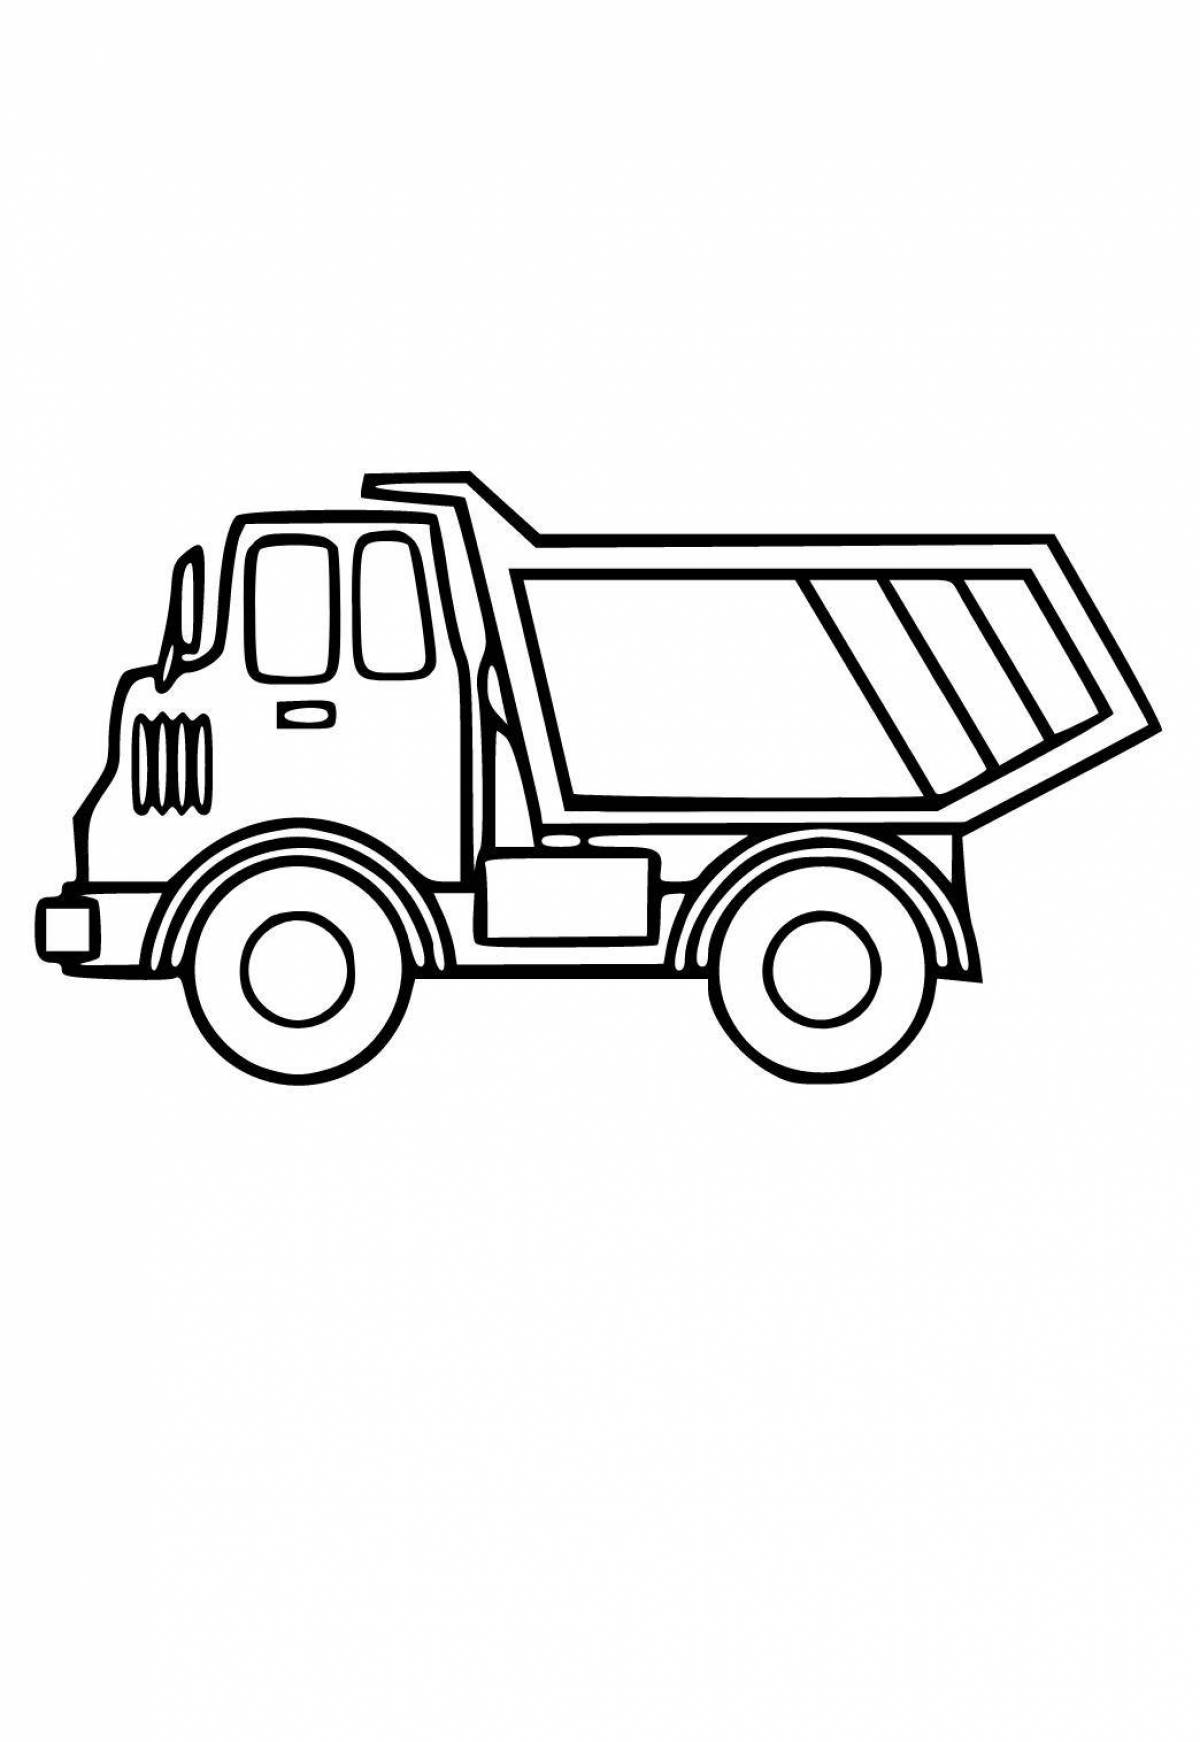 Funny dump truck coloring pages for kids